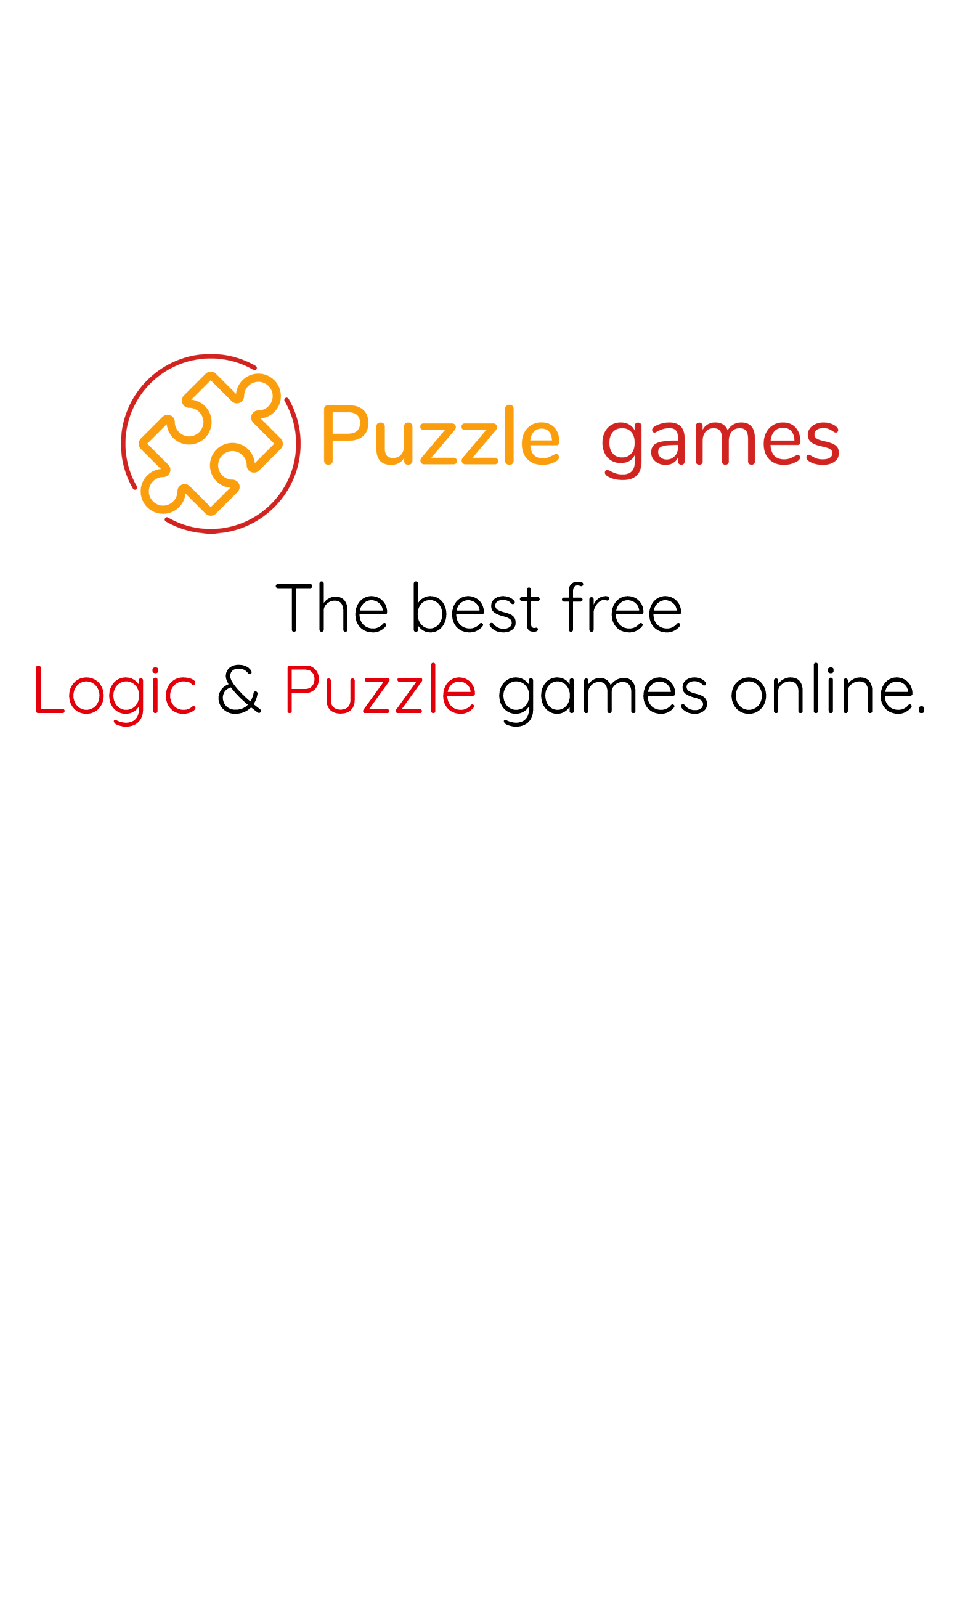 Play Free Puzzle Games Online at